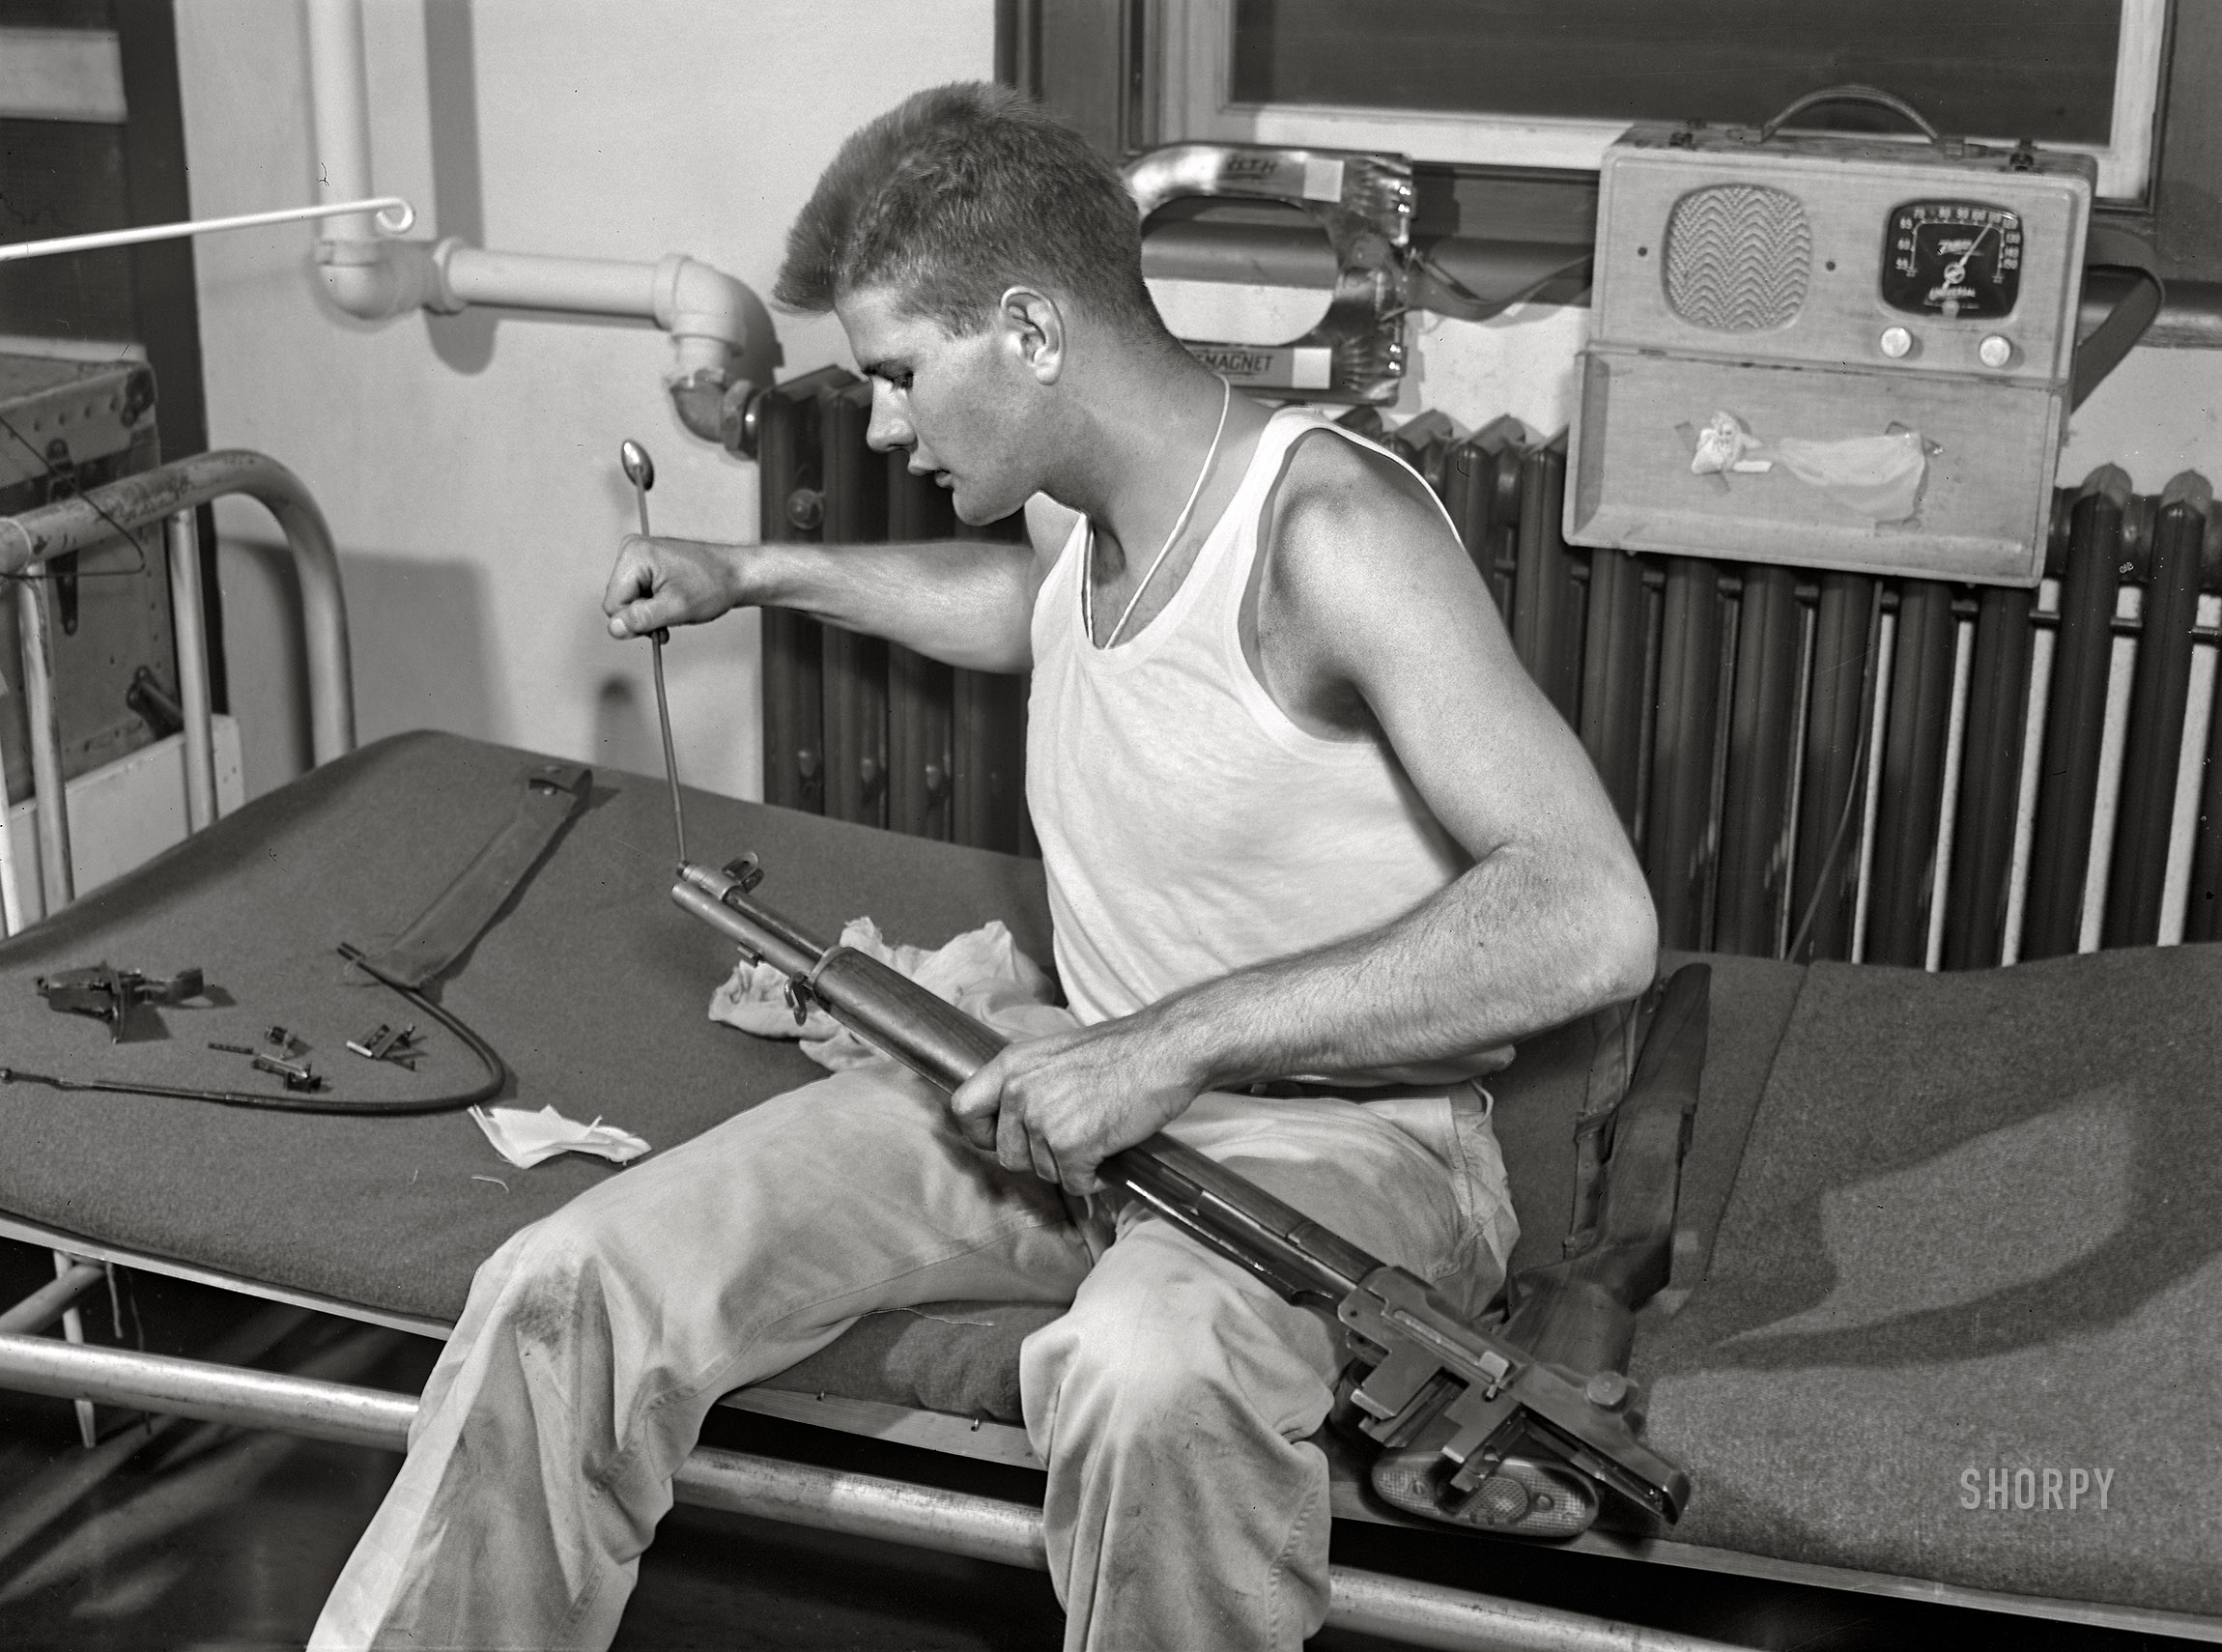 September 1942. "Fort Belvoir, Virginia. Sergeant George Camplair cleans his rifle regularly." Acetate negative by Jack Delano for the Office of War Information. View full size.